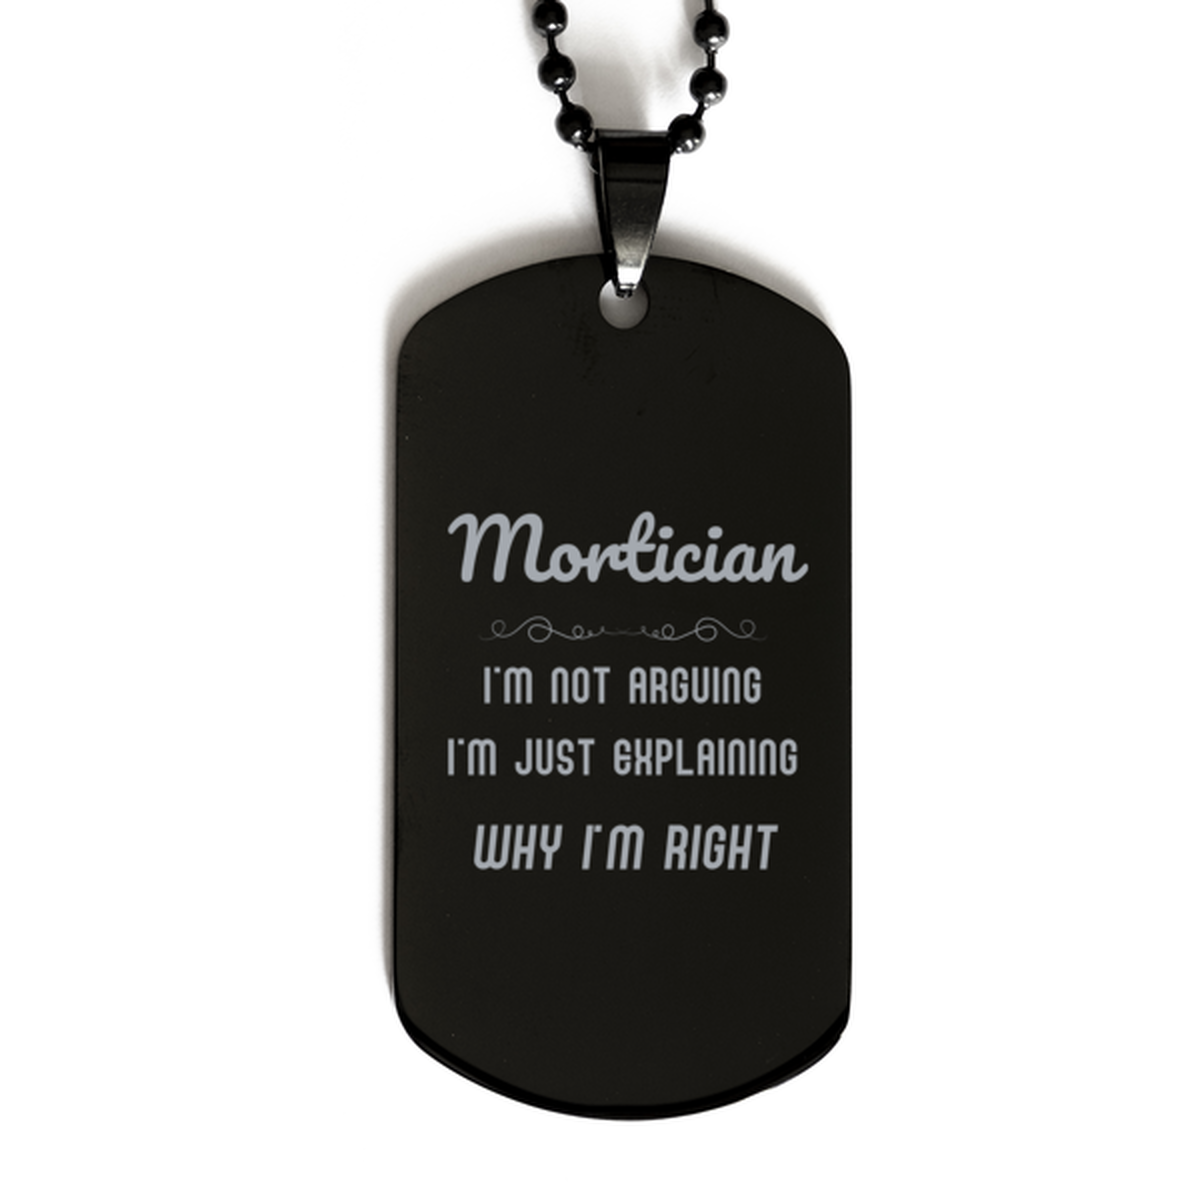 Mortician I'm not Arguing. I'm Just Explaining Why I'm RIGHT Black Dog Tag, Funny Saying Quote Mortician Gifts For Mortician Graduation Birthday Christmas Gifts for Men Women Coworker